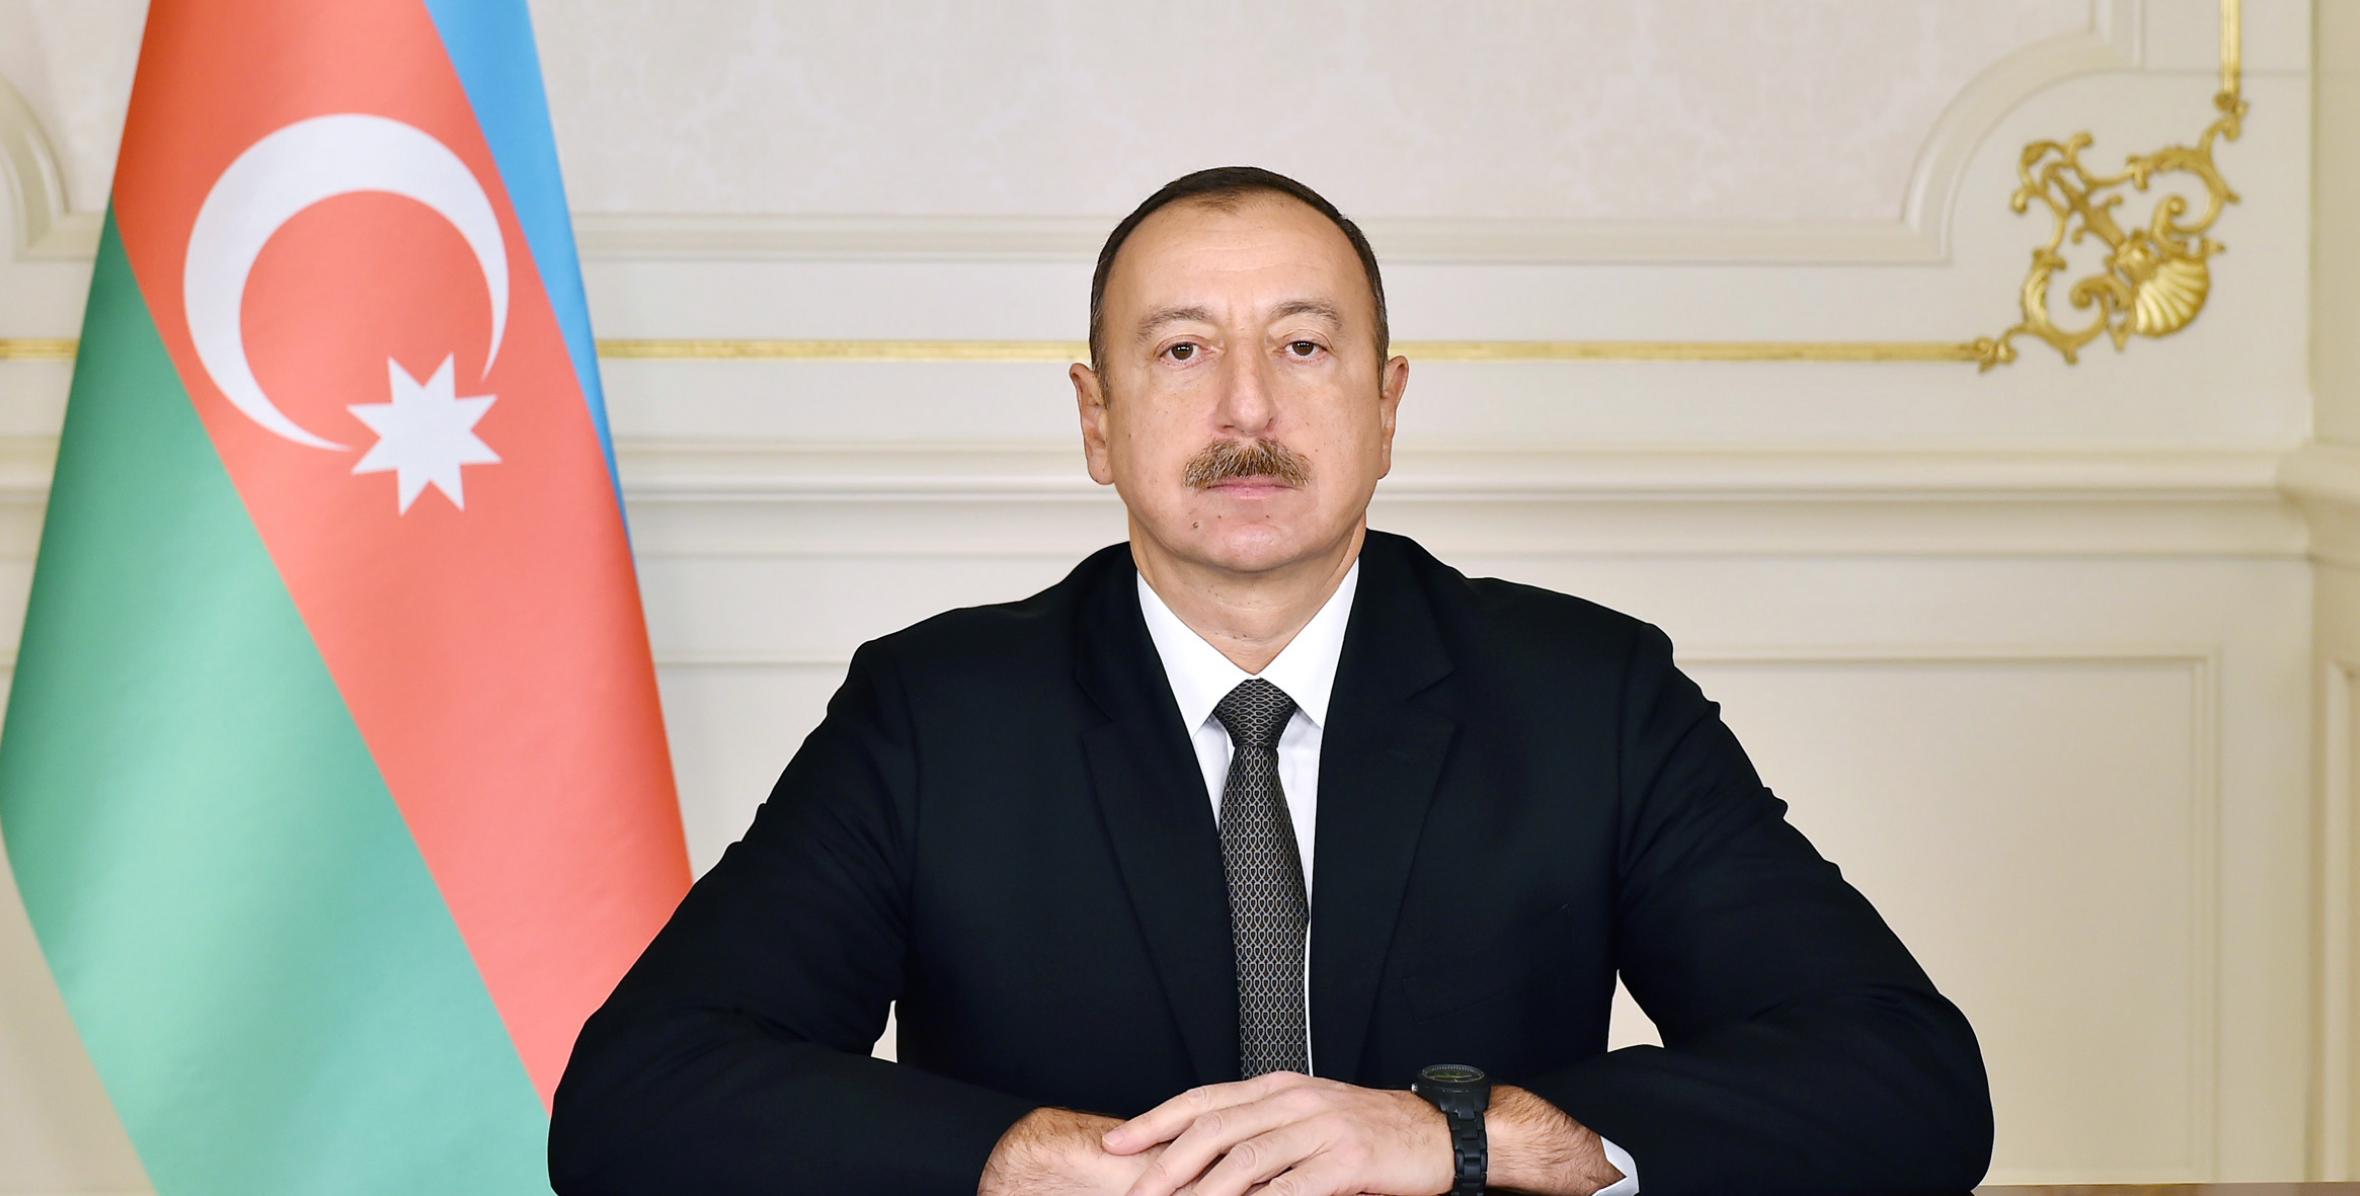 Congratulatory address of Ilham Aliyev to the people of Azerbaijan on the occasion of the Day of Solidarity of World Azerbaijanis and New Year